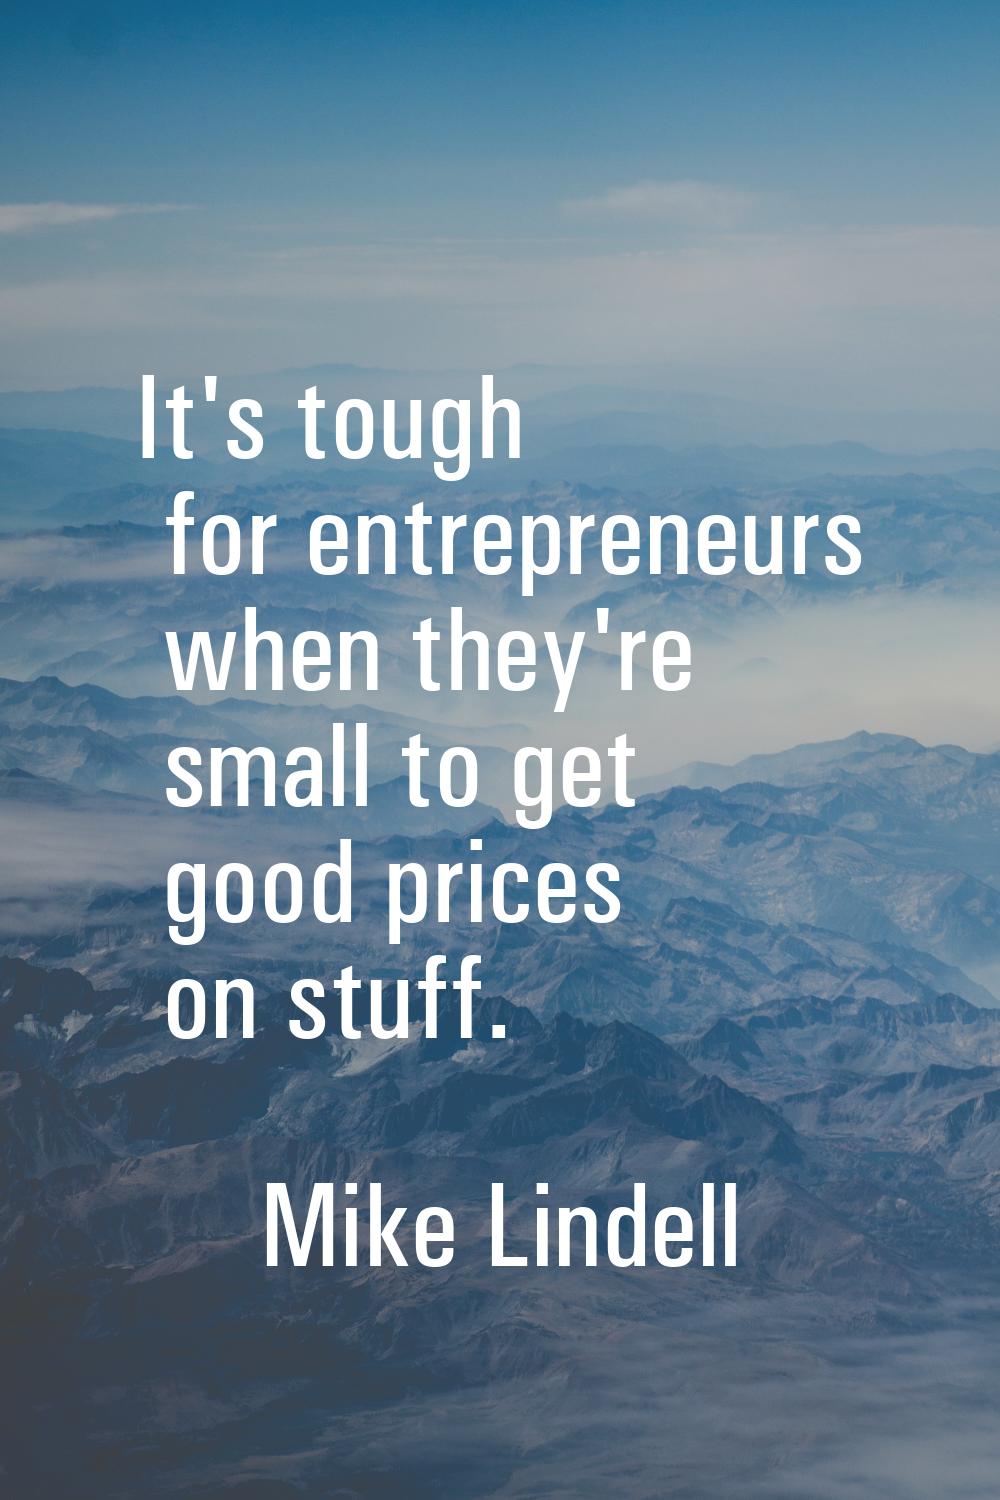 It's tough for entrepreneurs when they're small to get good prices on stuff.